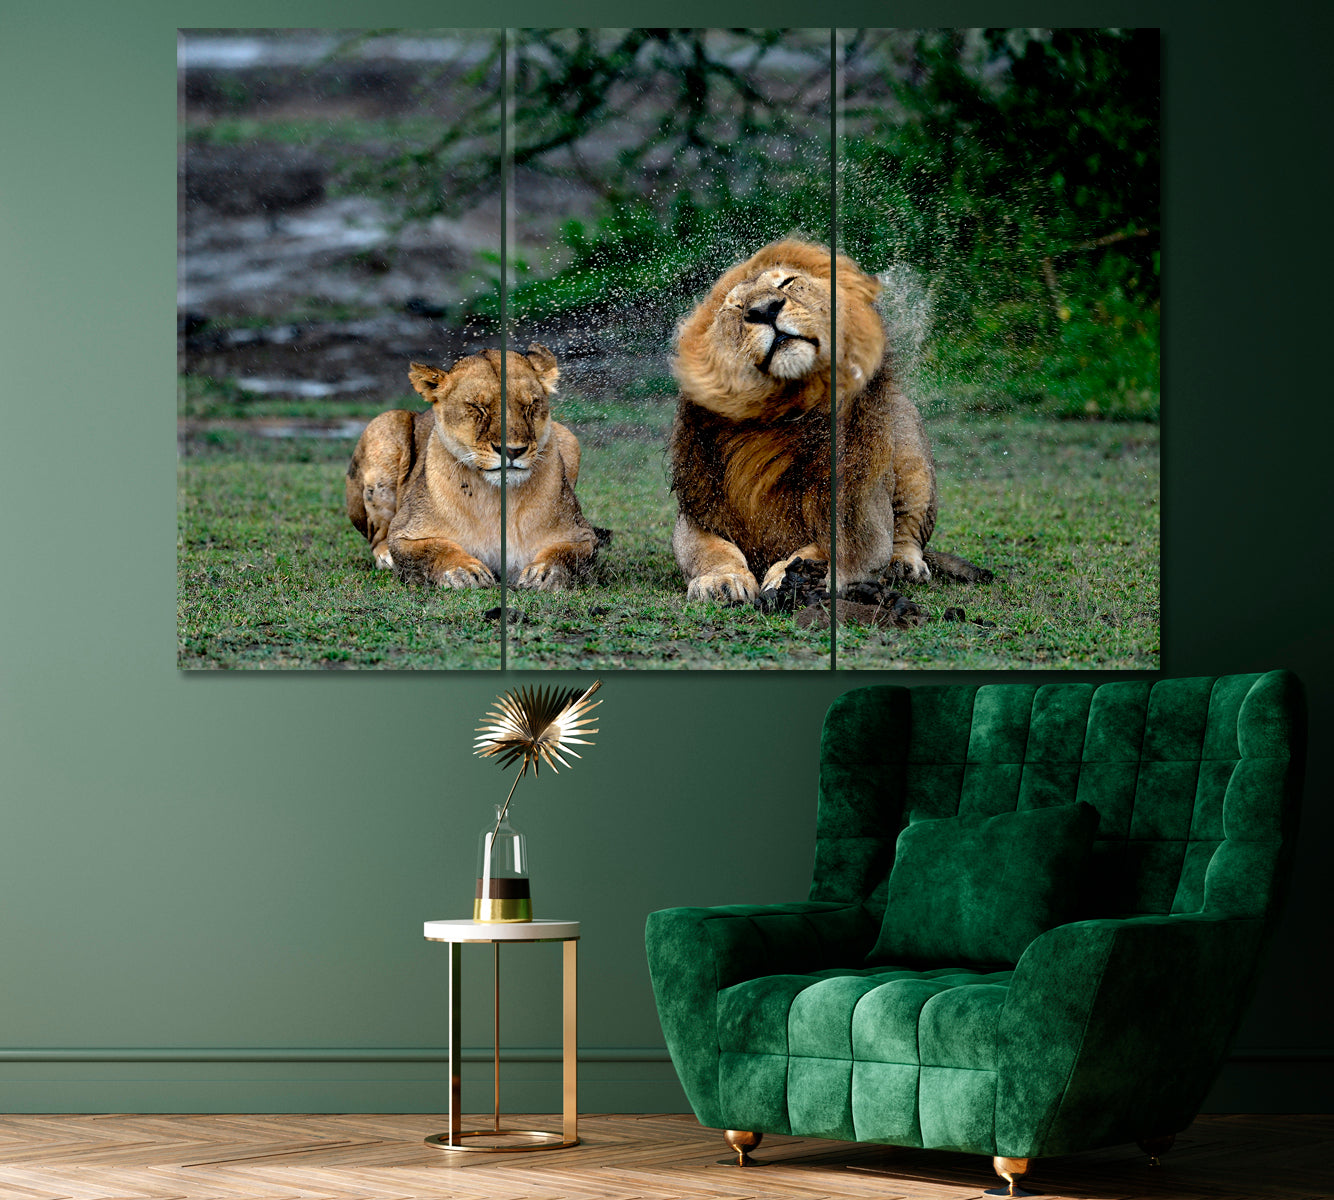 Lions under Rain in Ngorongoro Conservation Area Tanzania Canvas Print ArtLexy 3 Panels 36"x24" inches 